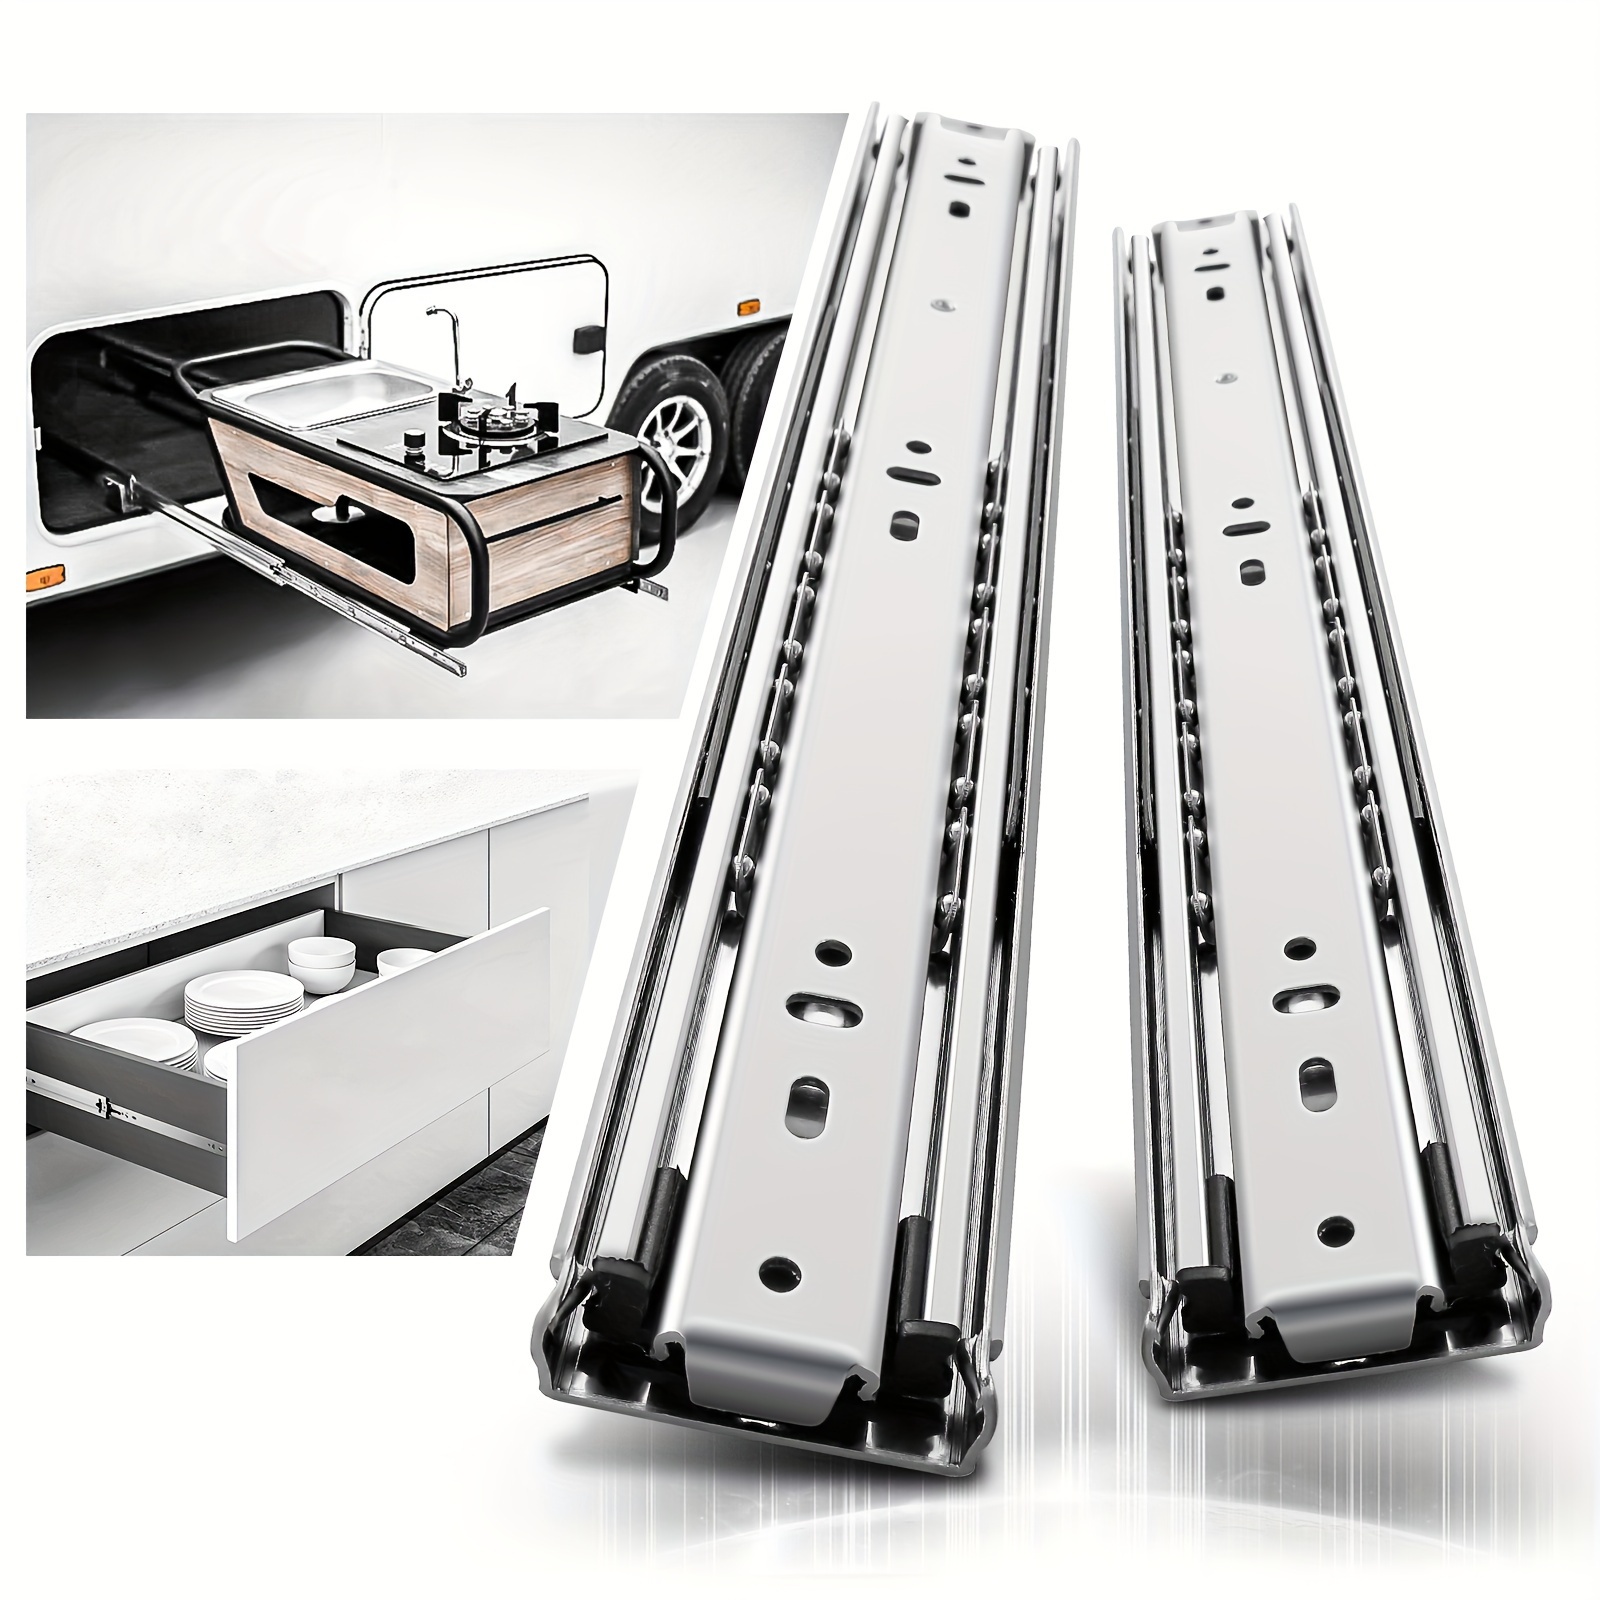 

1 Pair 51mm Wide Heavy Duty Drawer Slides, 150 Lb Capacity, 3 Section Full Extension Ball Bearing Side Mount Drawer Slides